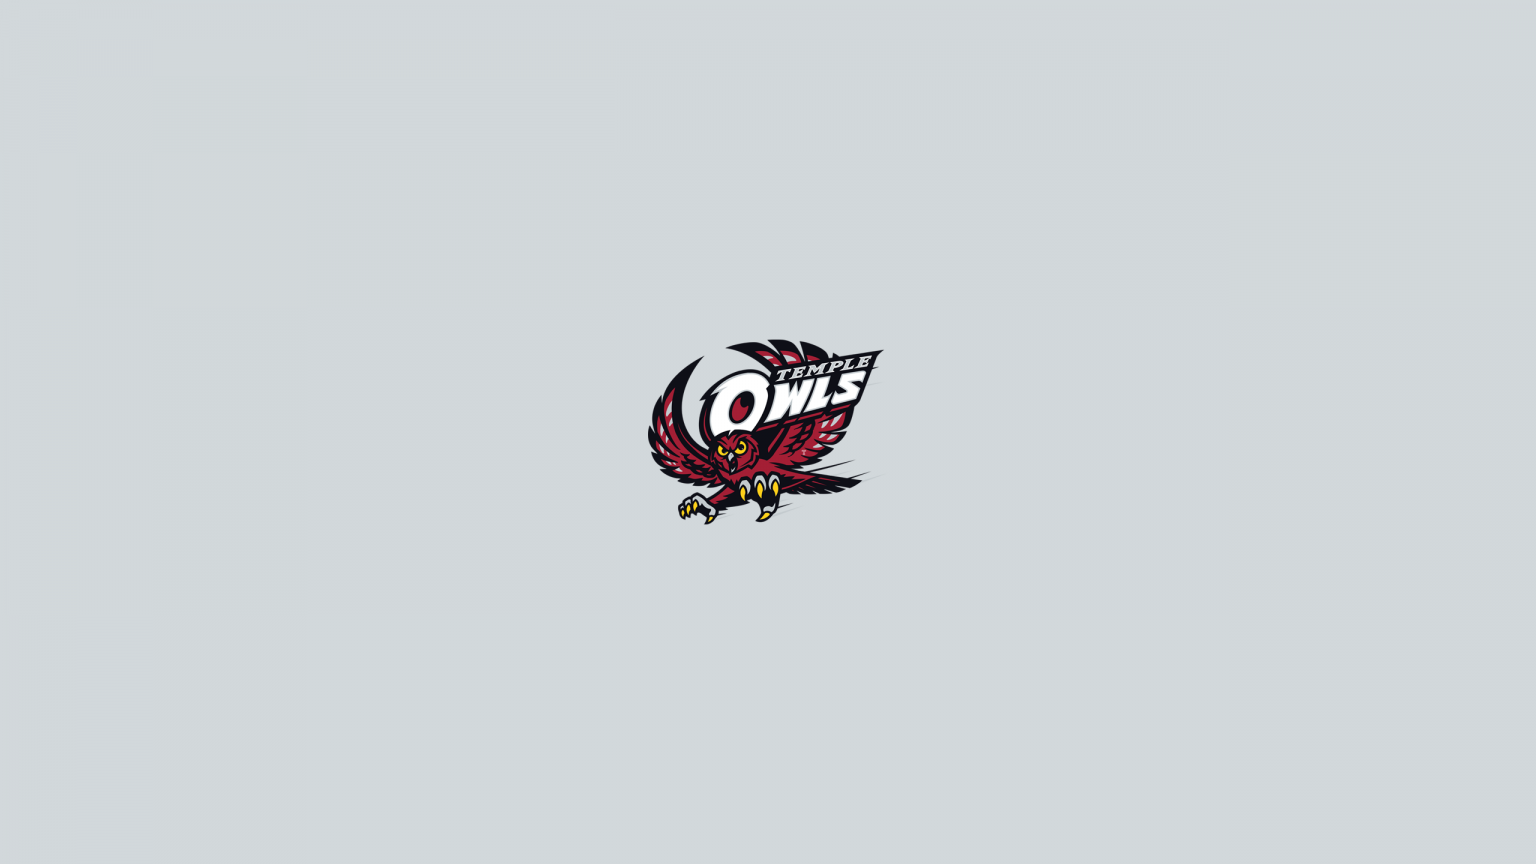 Temple Owls Basketball - NCAAB - Square Bettor